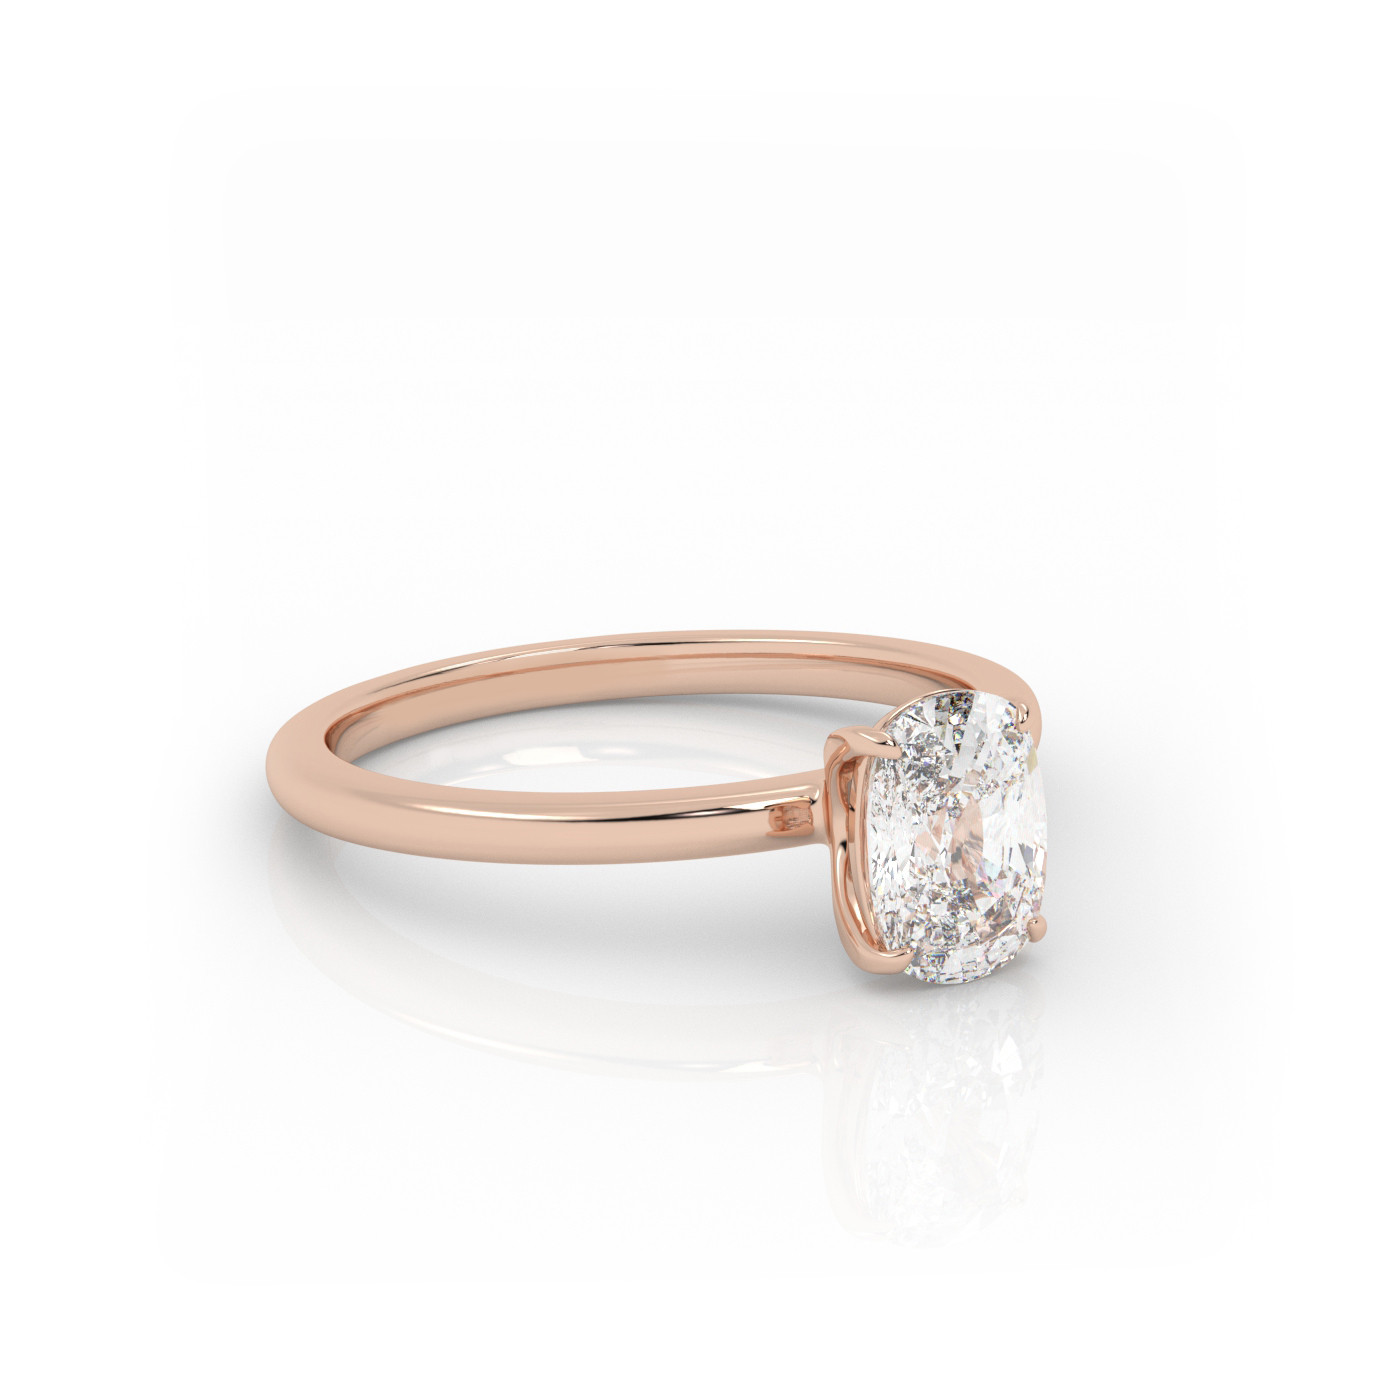 18K ROSE GOLD Elongated Cushion Cut Classic Solitaire Engagement Ring